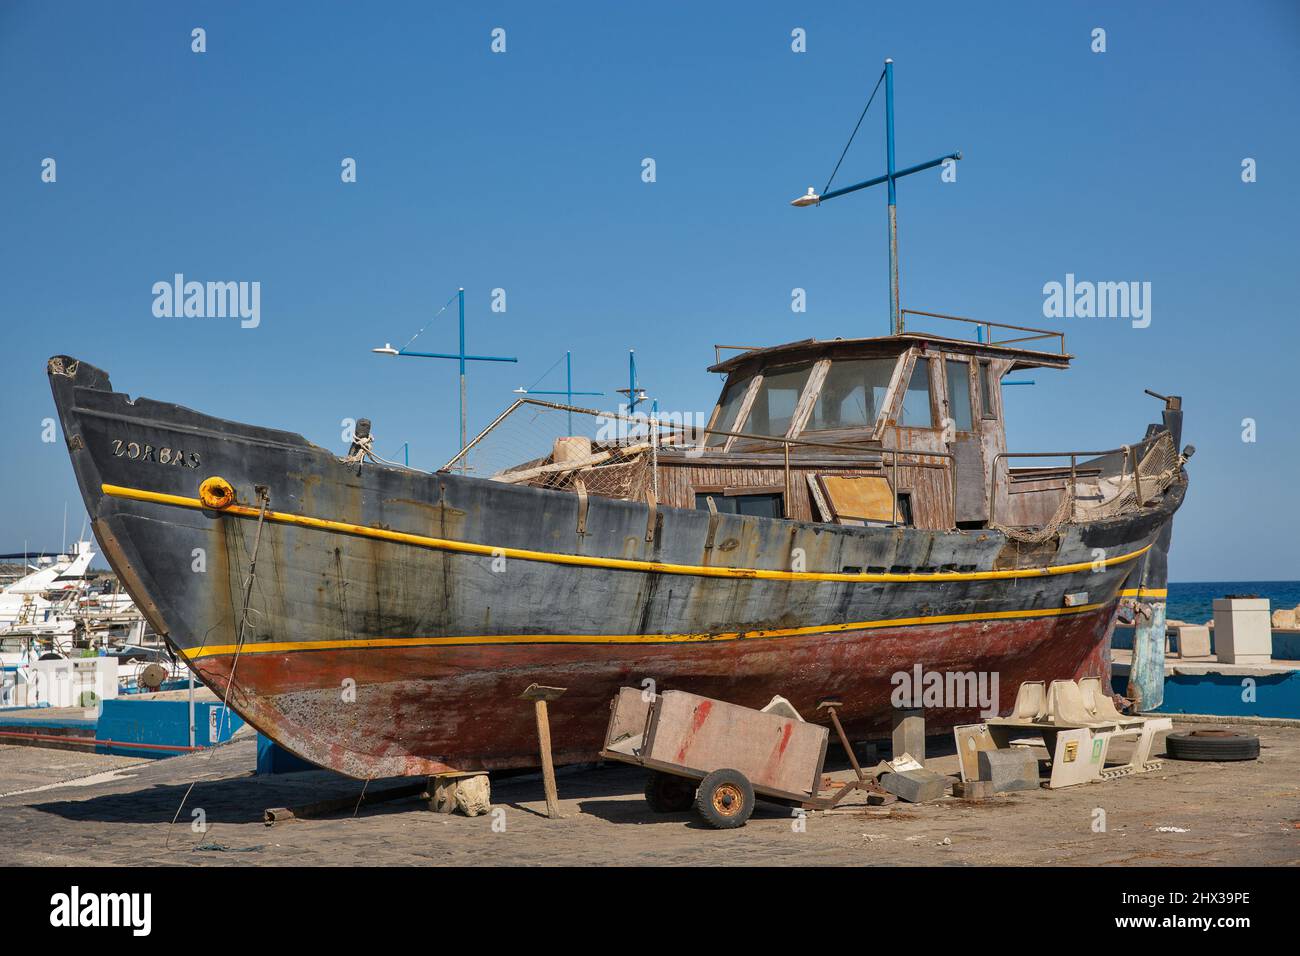 Ayia Napa, Cyprus - May 23, 2021: Old famous fishing boat Zorbas in seaport. Ayia Napa is a tourist resort at the far eastern end of the southern coas Stock Photo